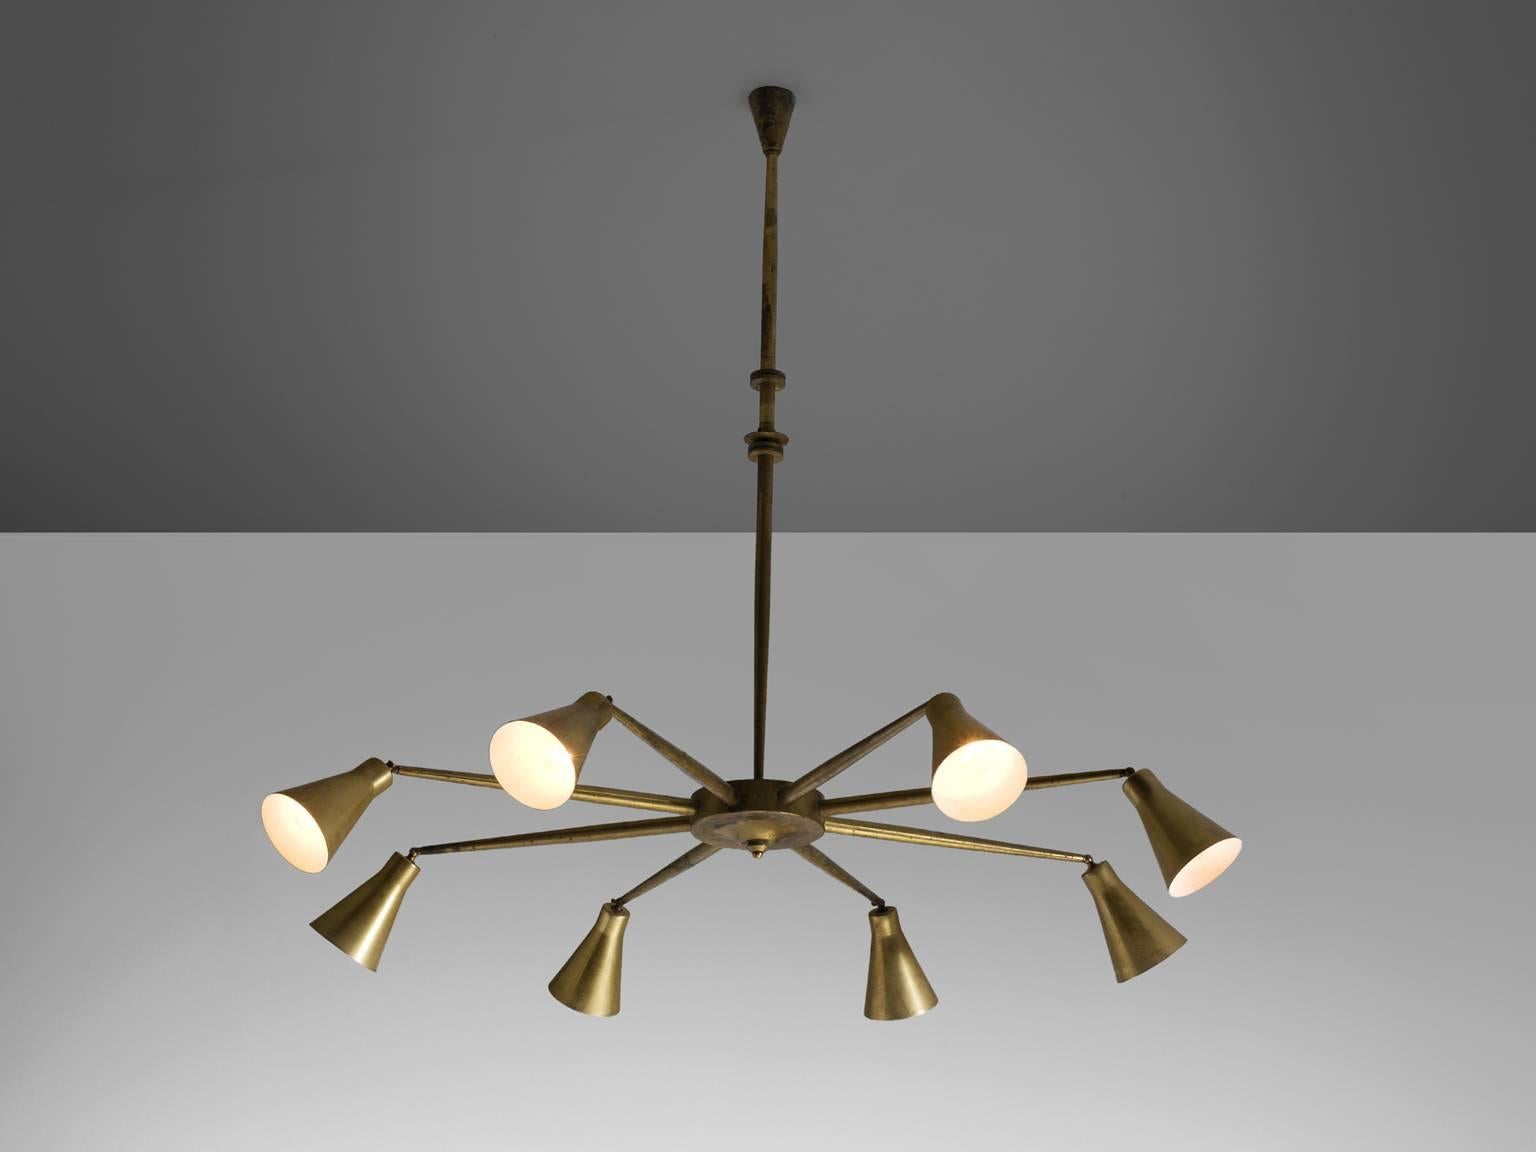 Pendant, brass, circa 1958, Italy.

This brass, large eight armed pendant is attributed to Giuseppe Ostuni for O-Luce. The lamp is both modern and classic at the same time. A trait that Italian lights often achieve. The pendant has grandeur, that